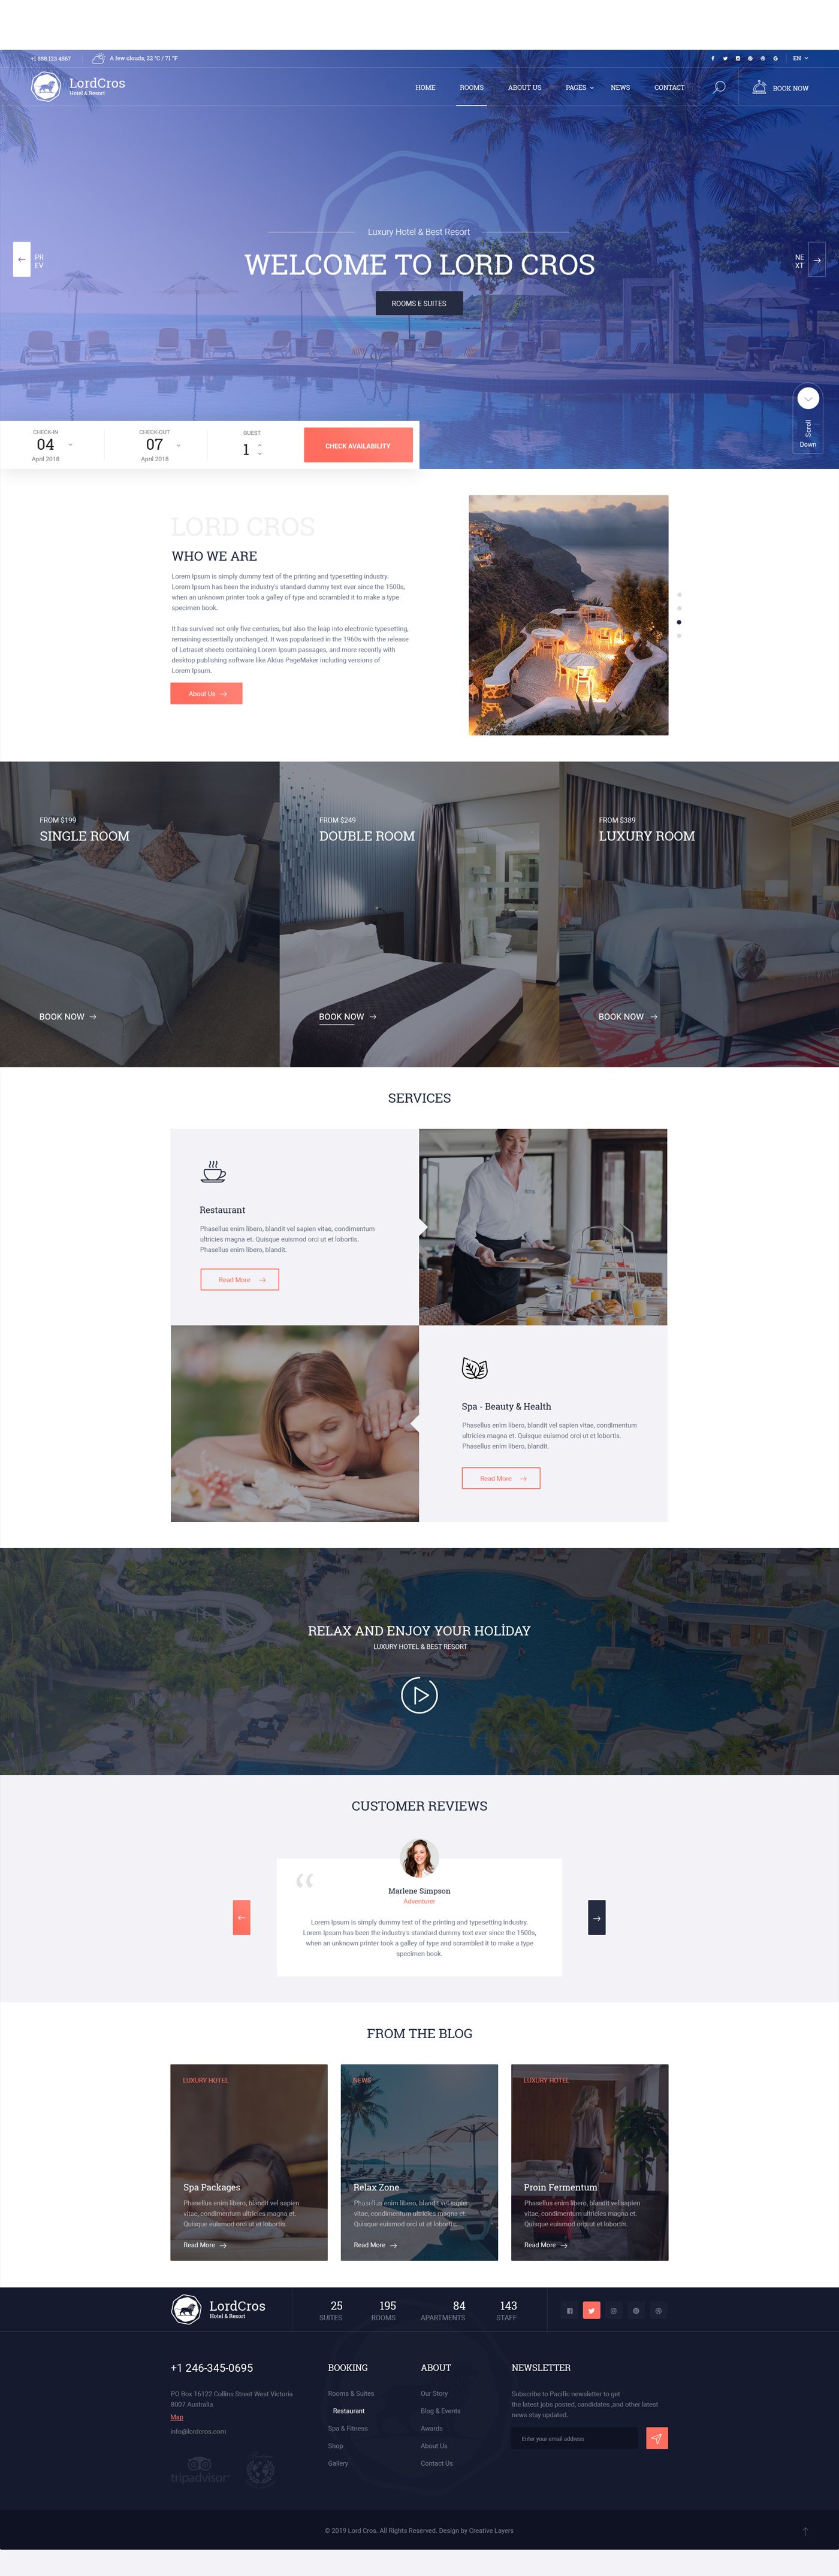 LordCros - Hotel, Resort & Spa PSD Template - 2